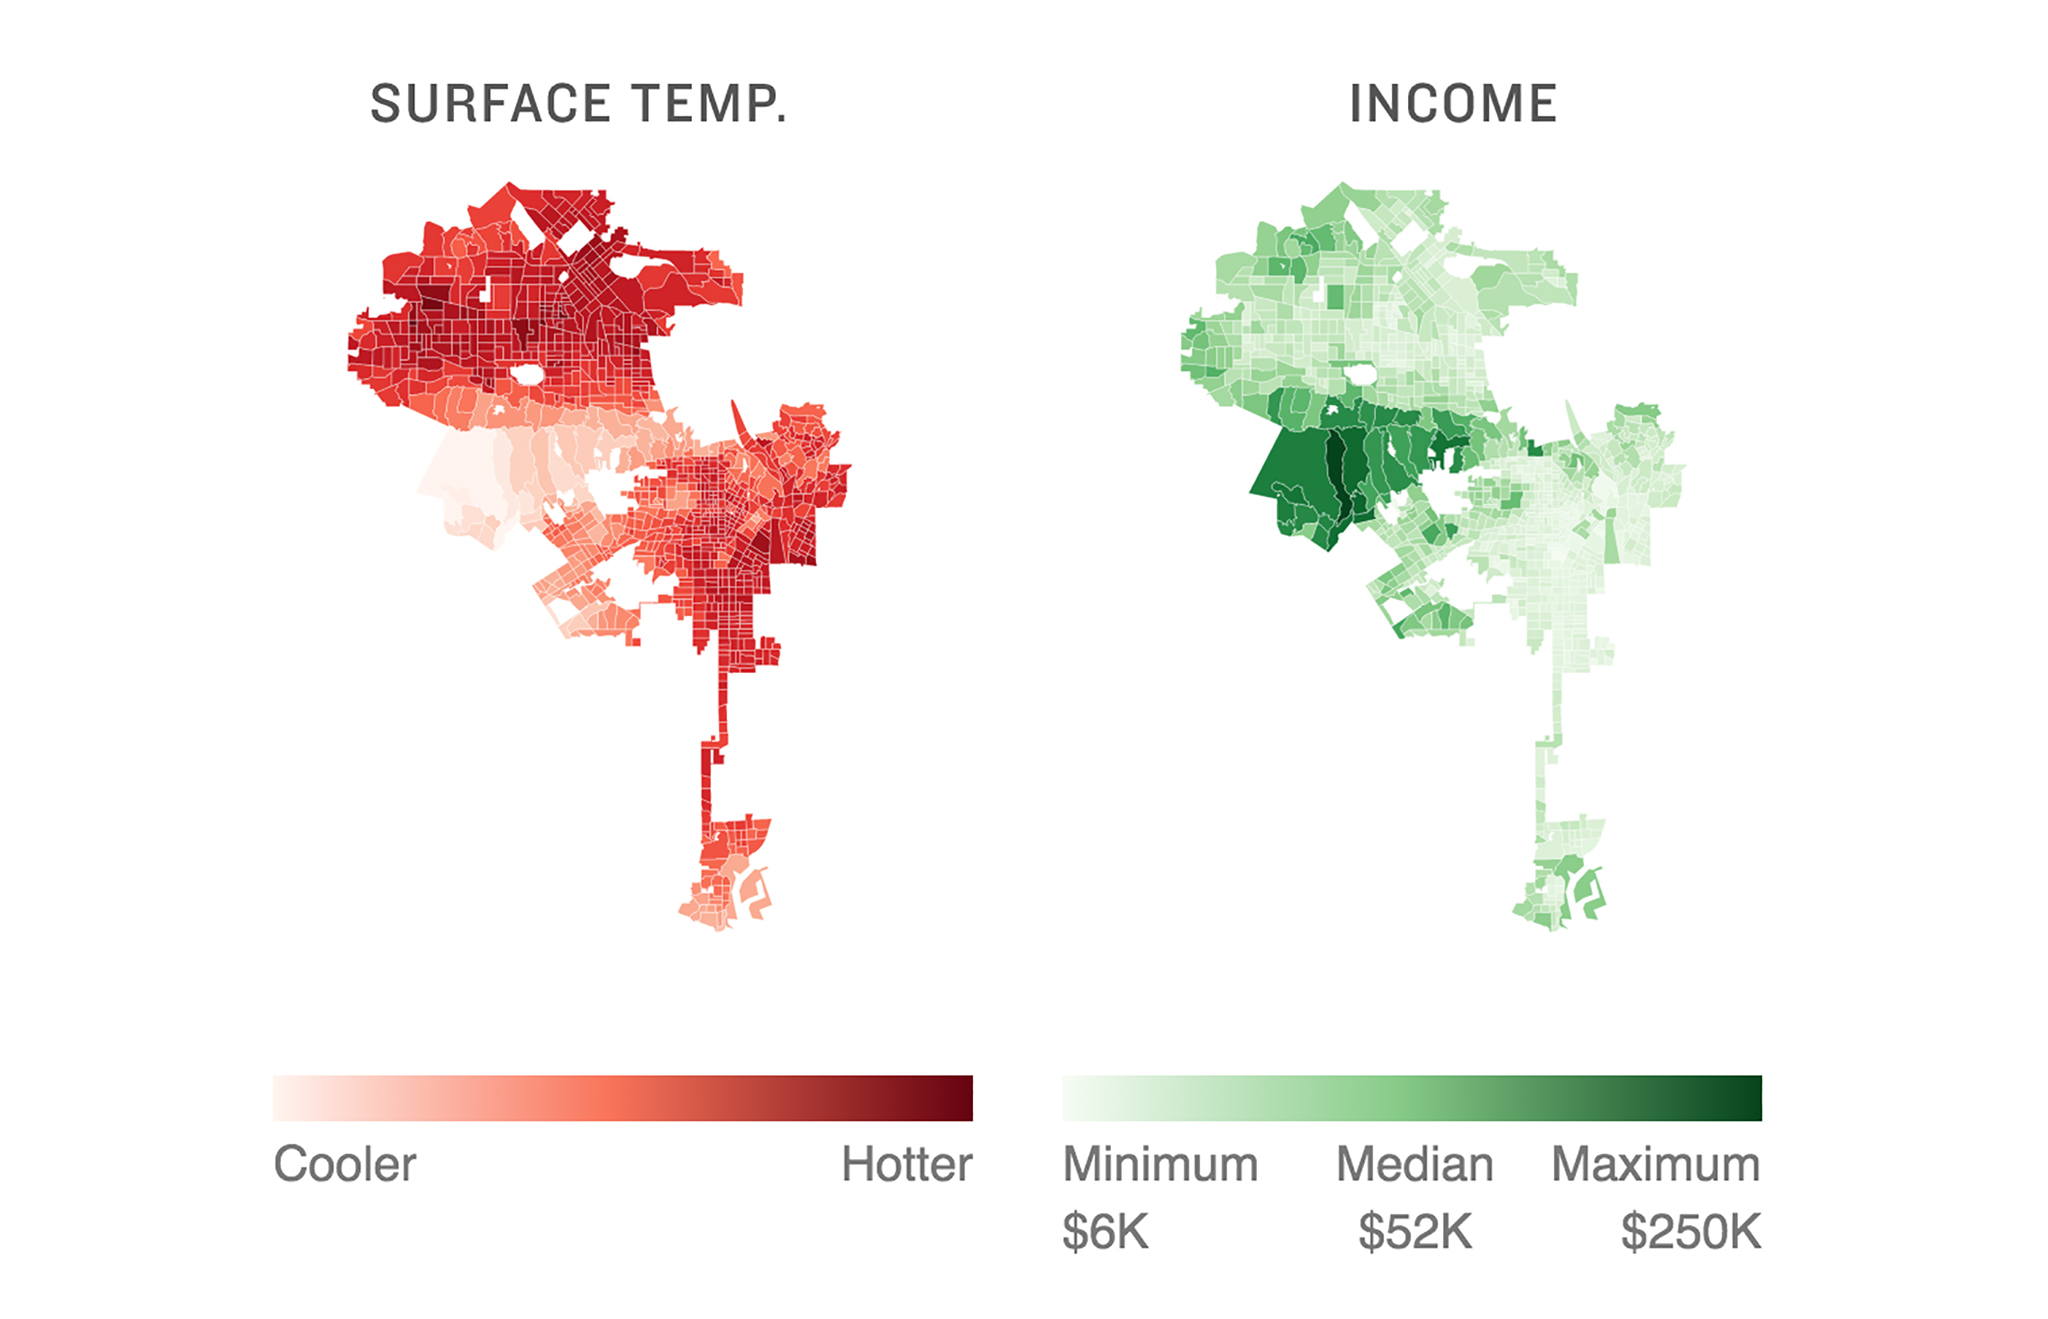 Two thematic maps, one showing household income and one showing temperature in Denver